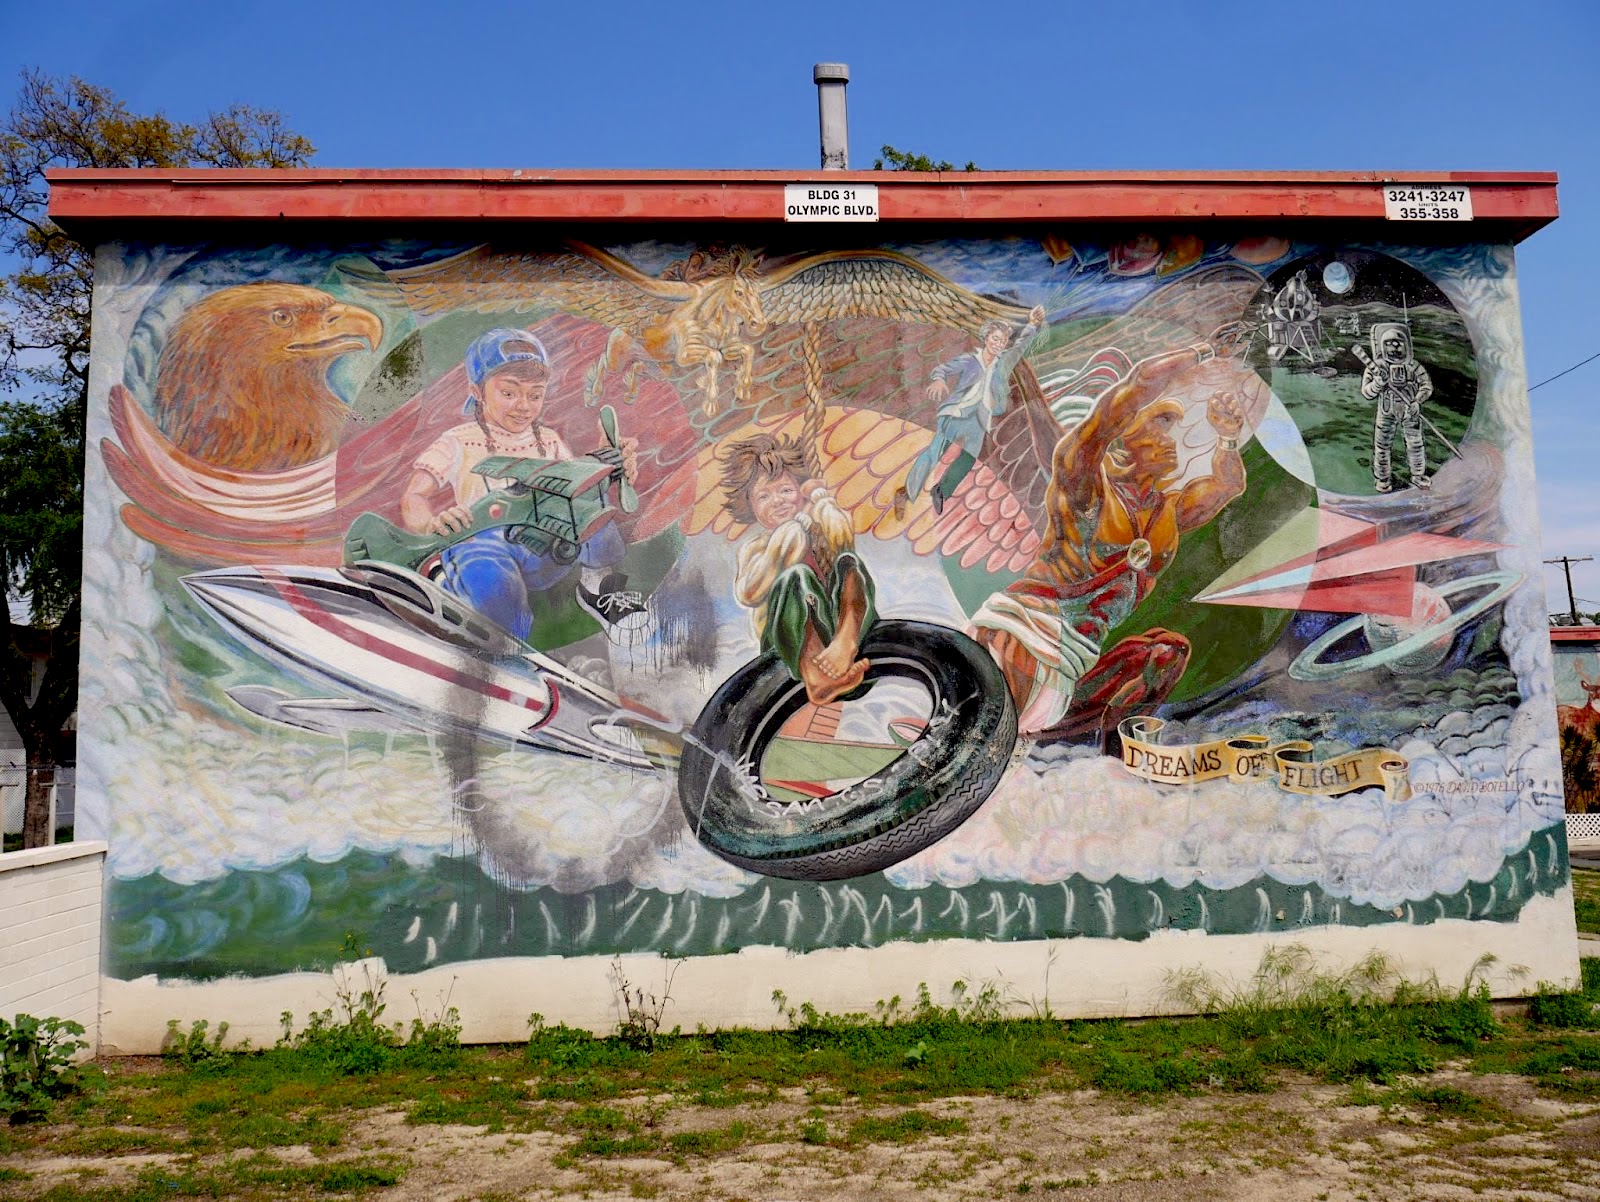 A mural called Dreams of Flight showing children at play